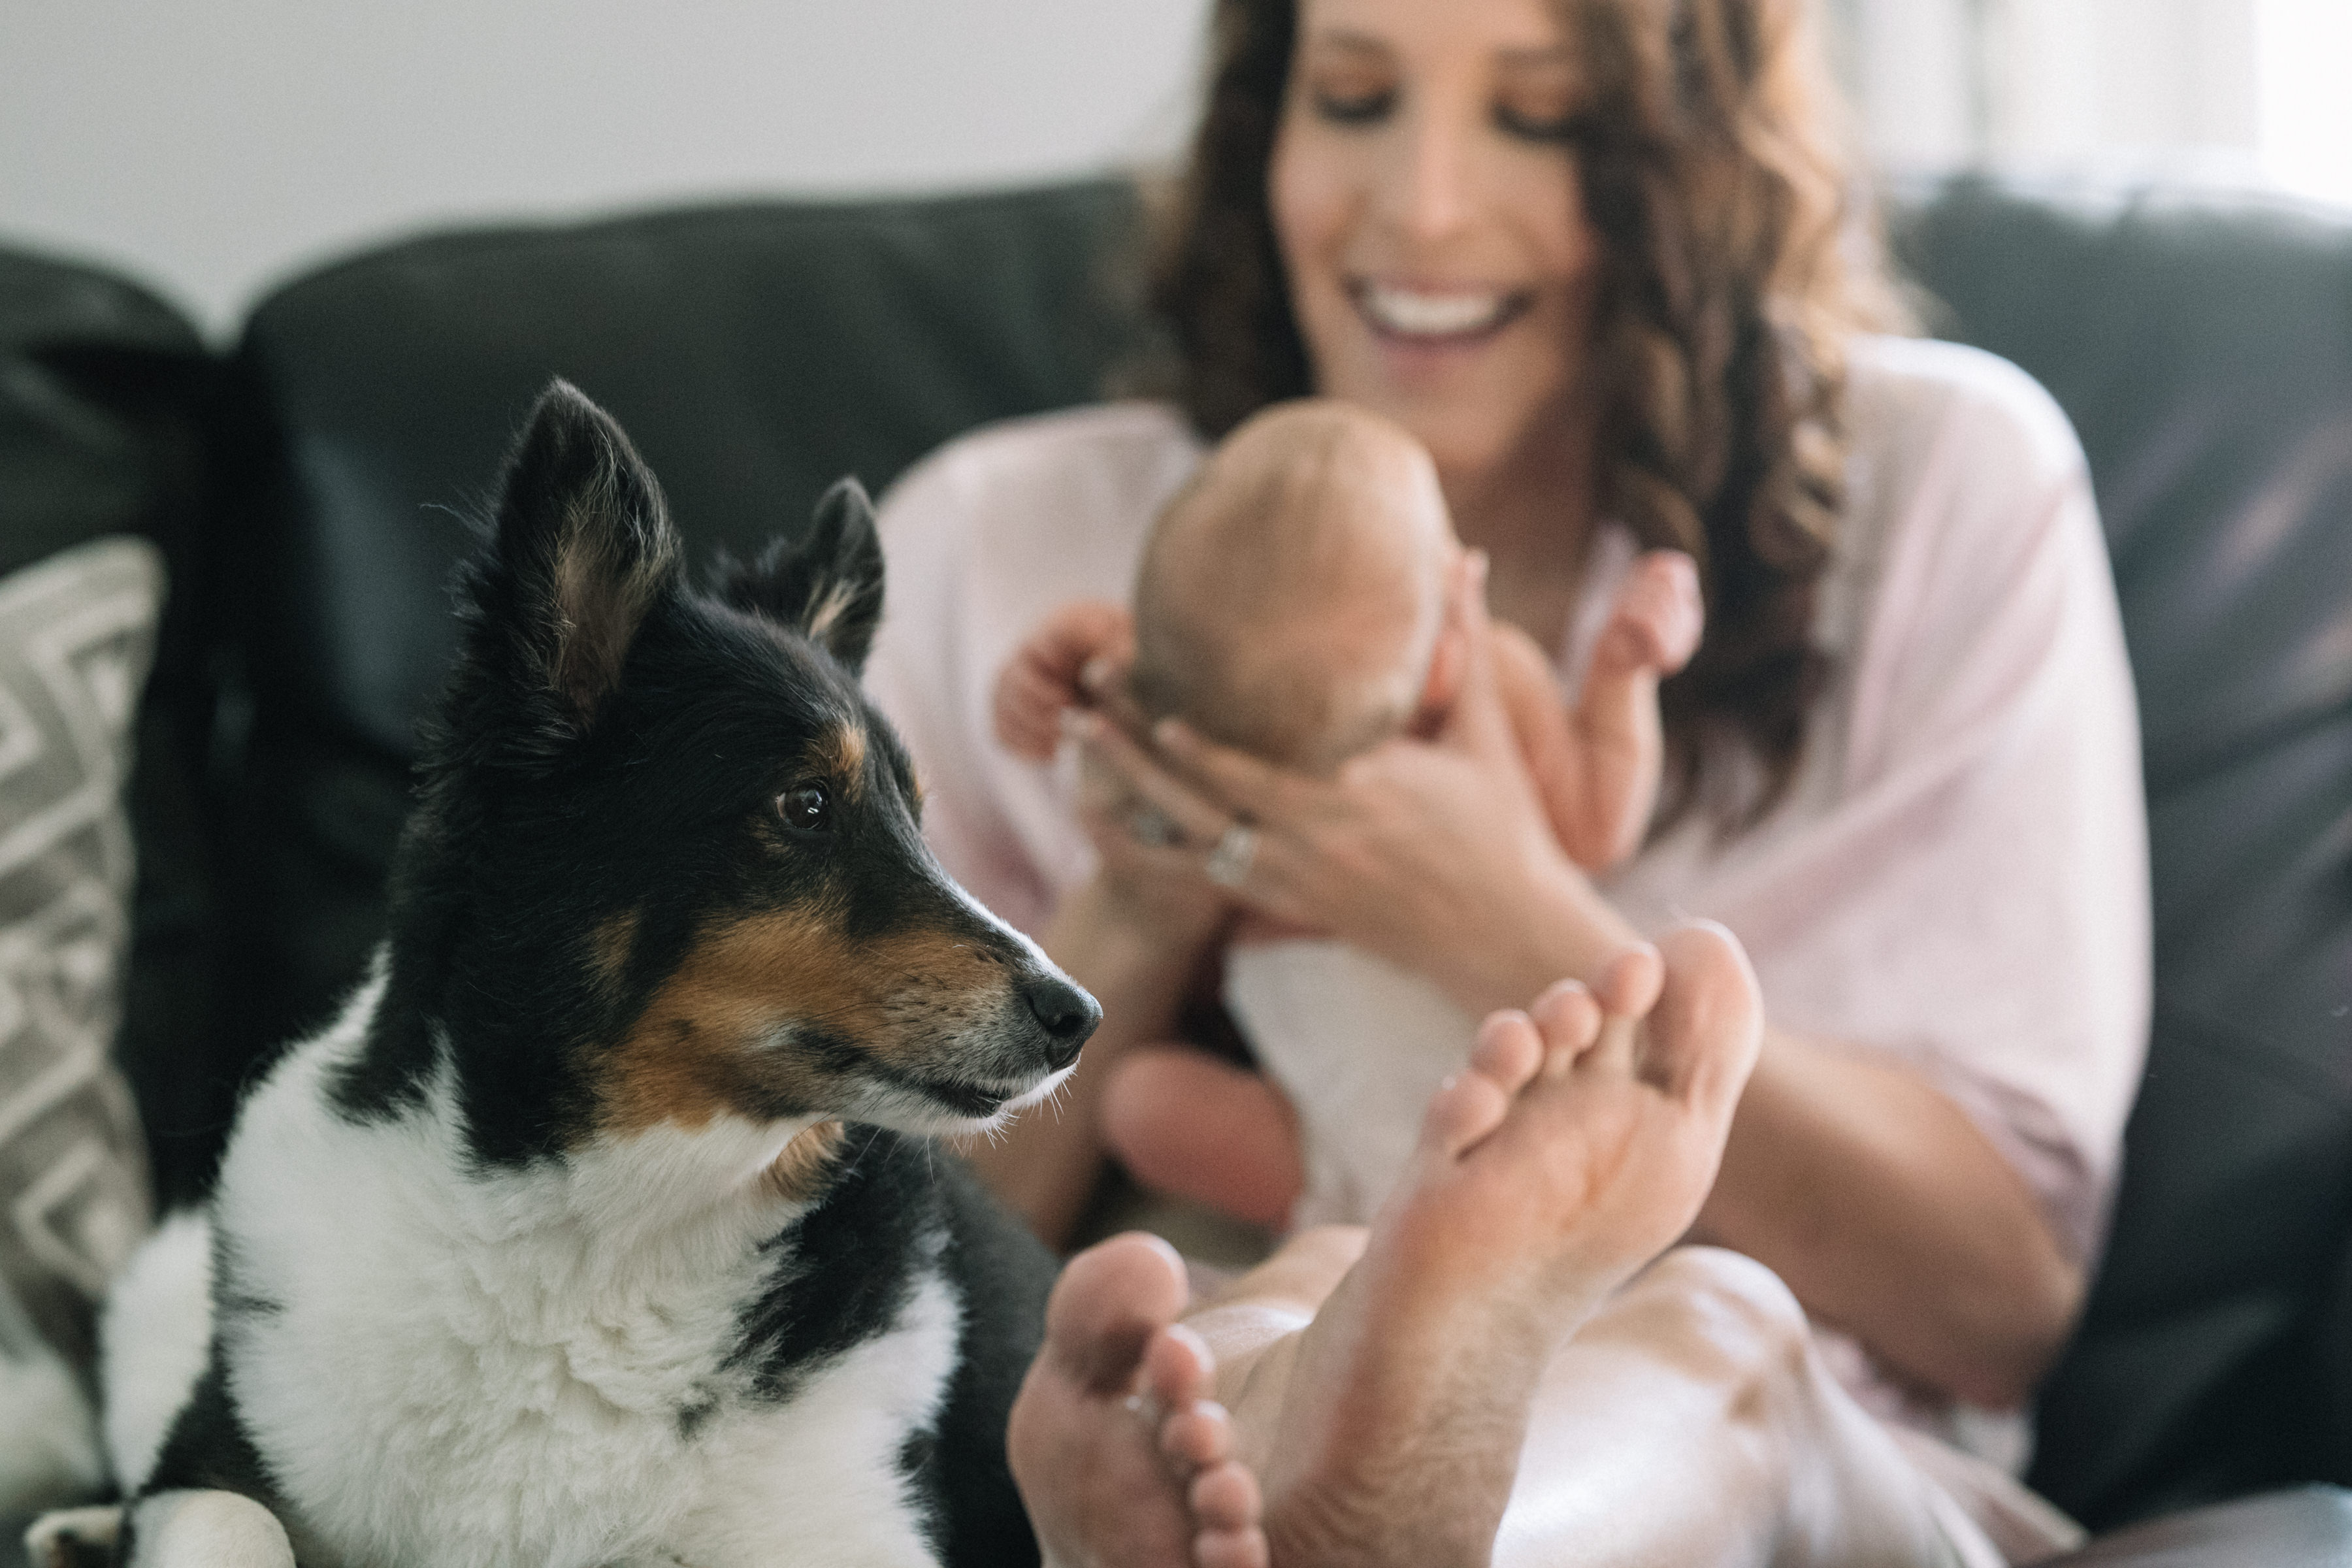 New mom holding her newborn baby girl with her dog watching over by her feet